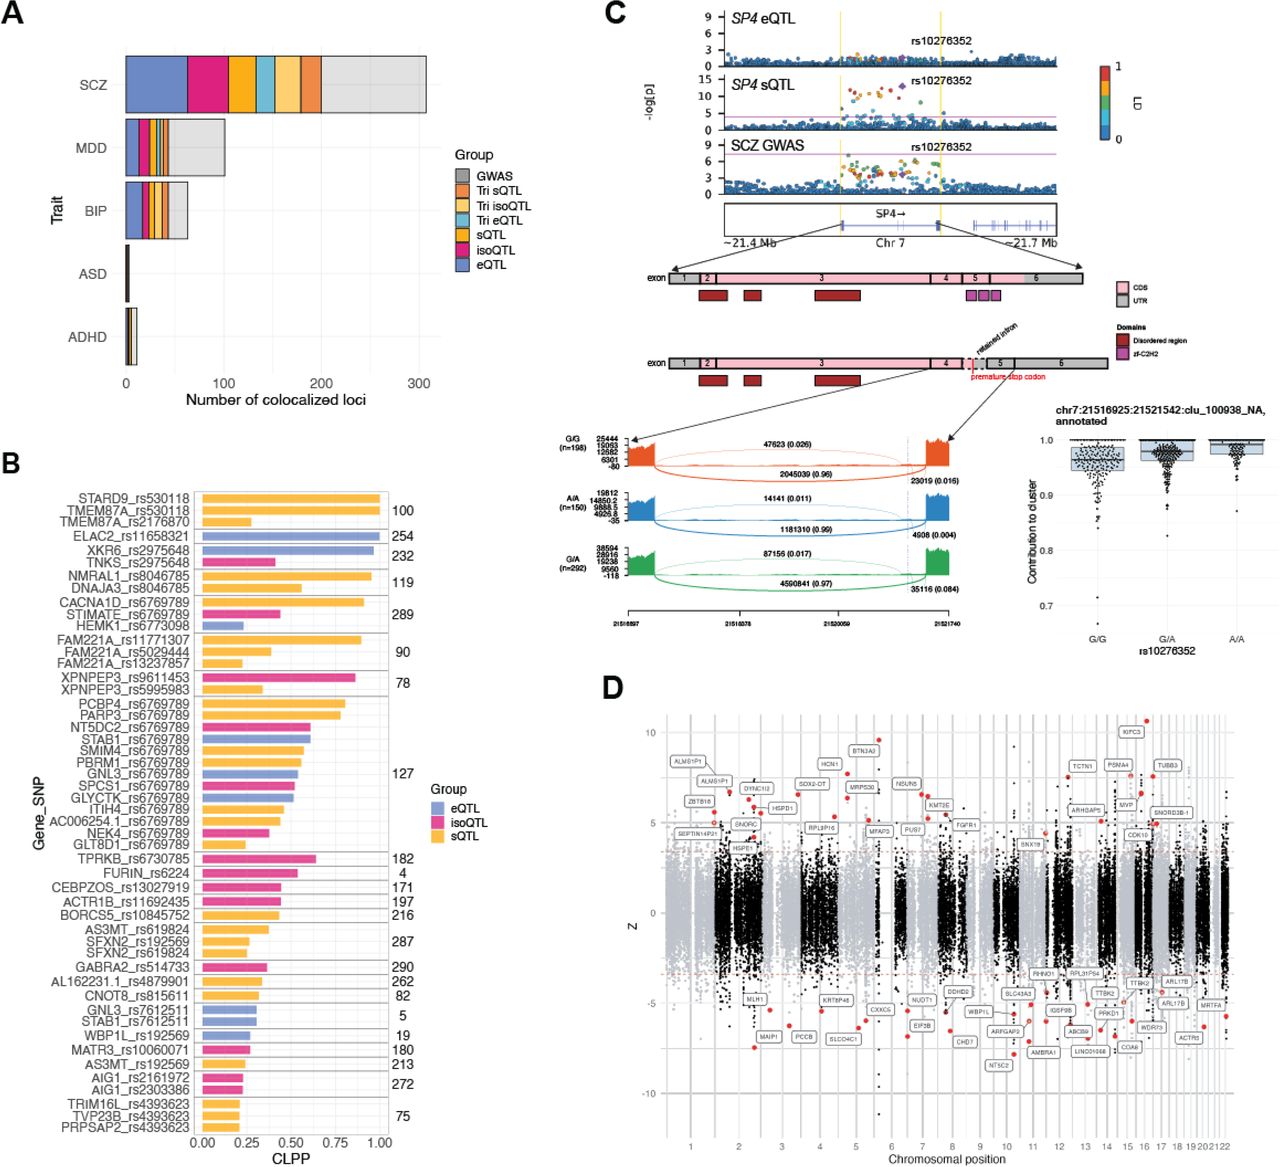 Integrating genome-wide association study with transcriptomic data